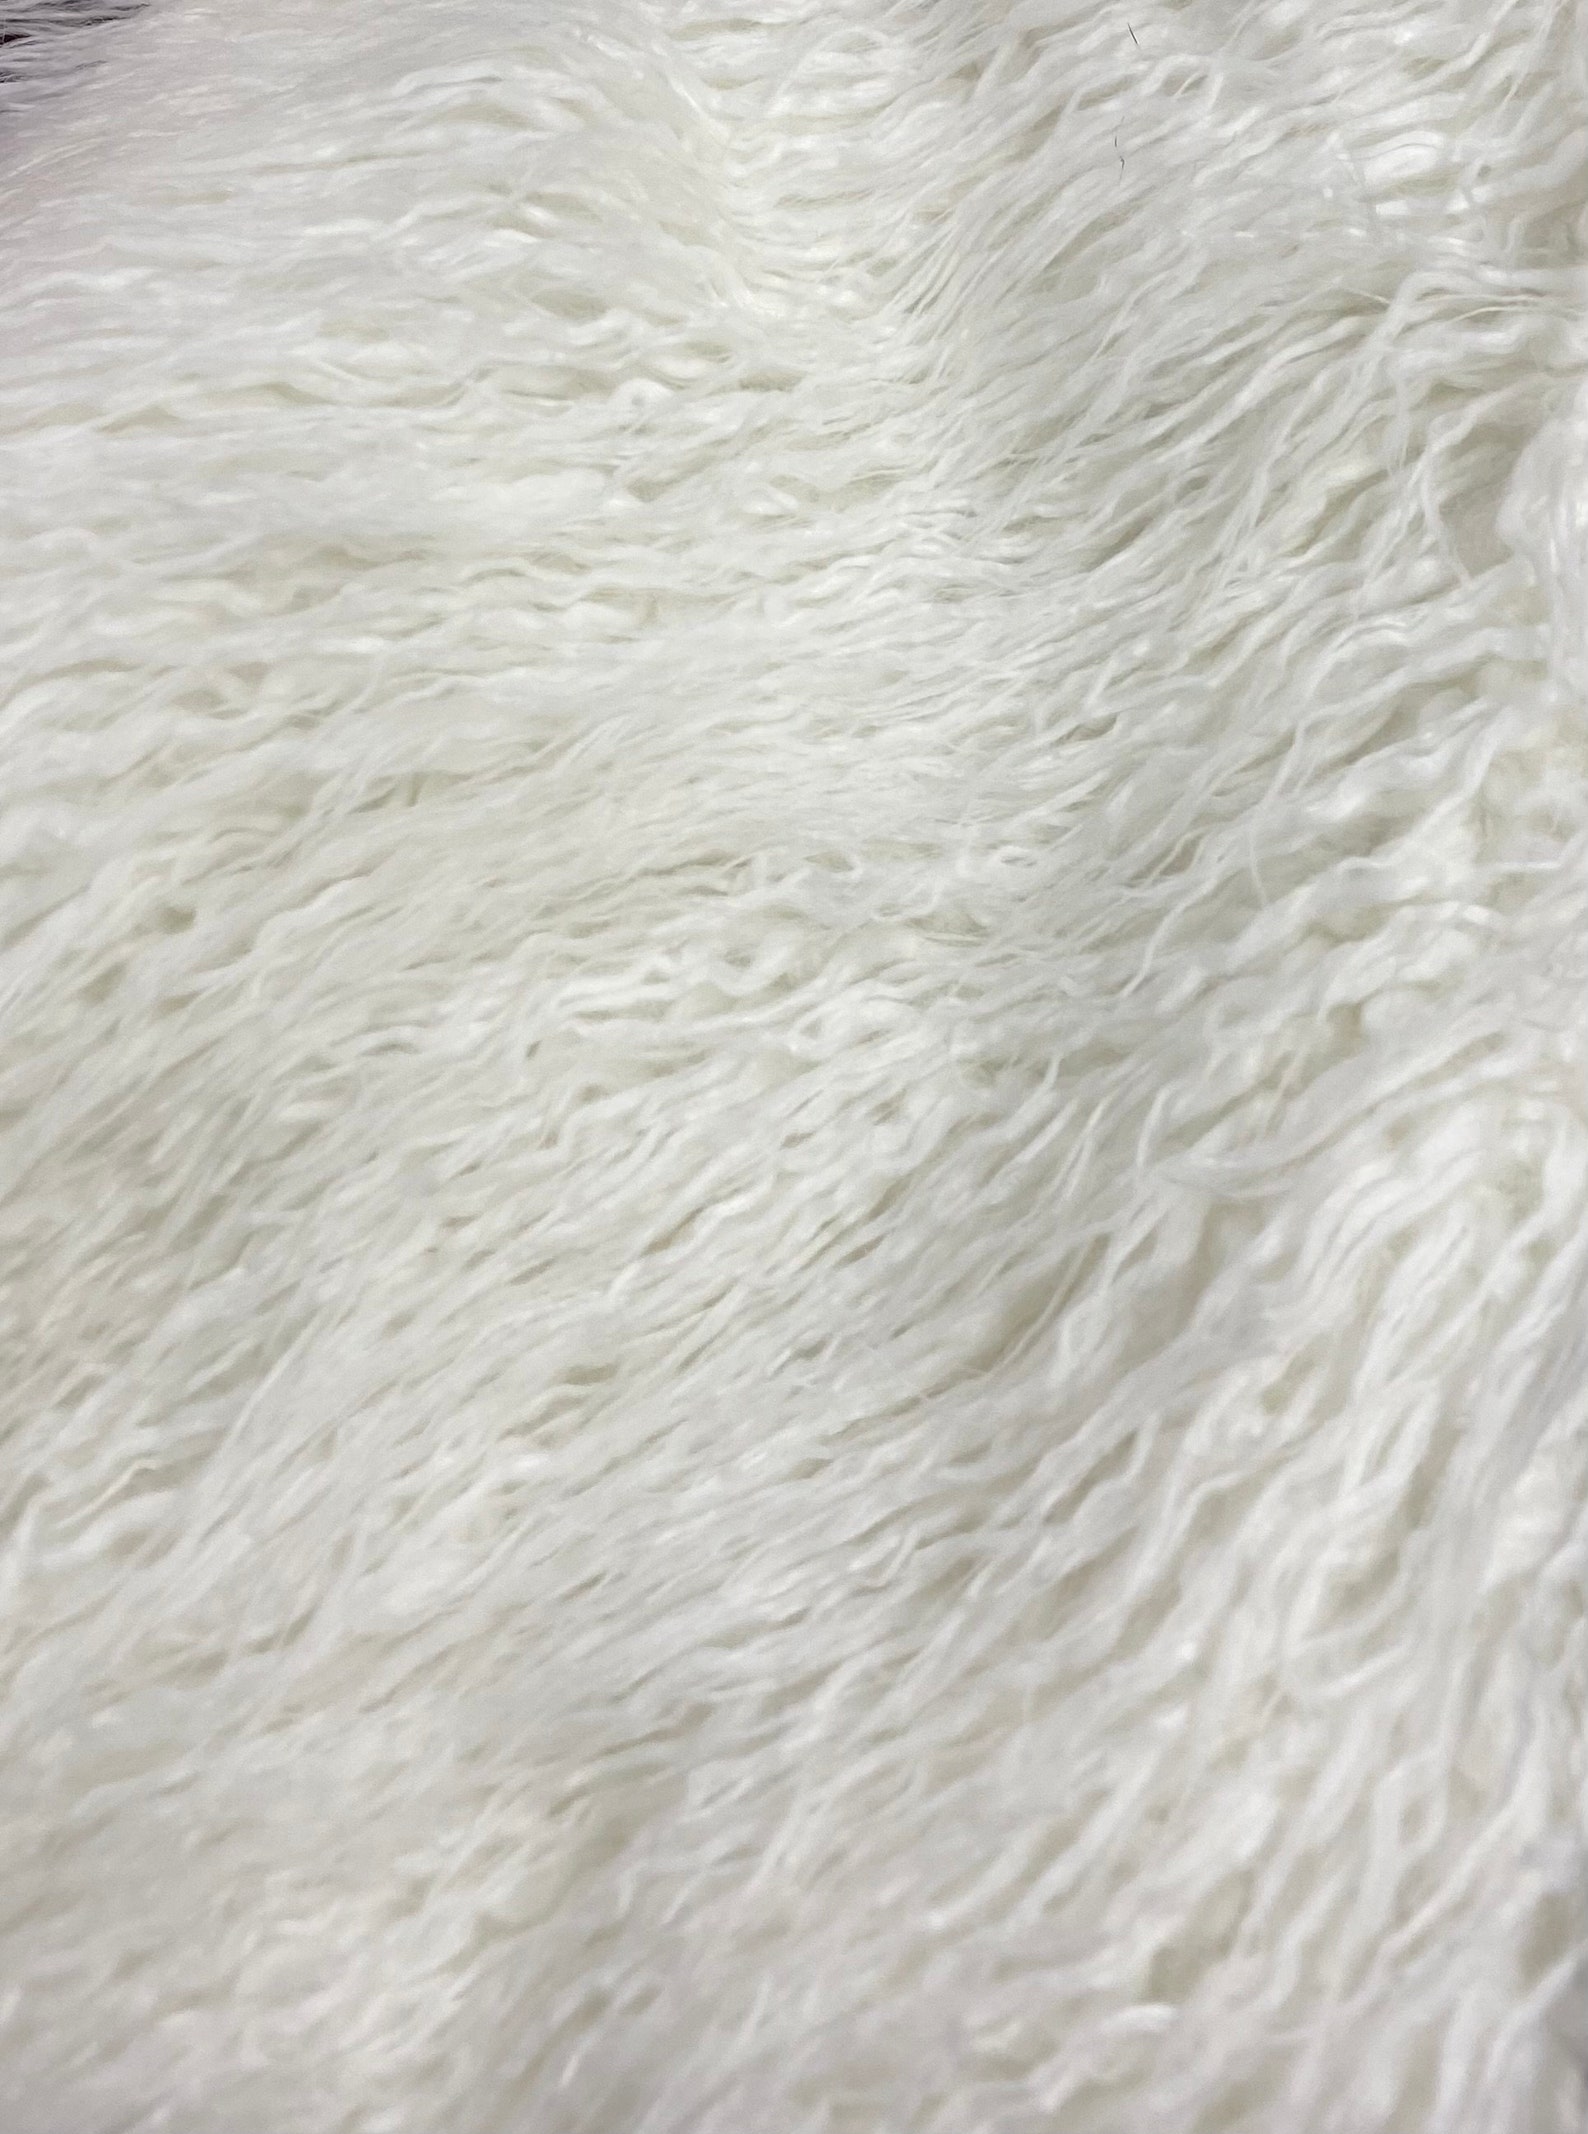 Mongolian Faux Fur Long Hair Pile Fabric BY THE YARD 60 - Etsy